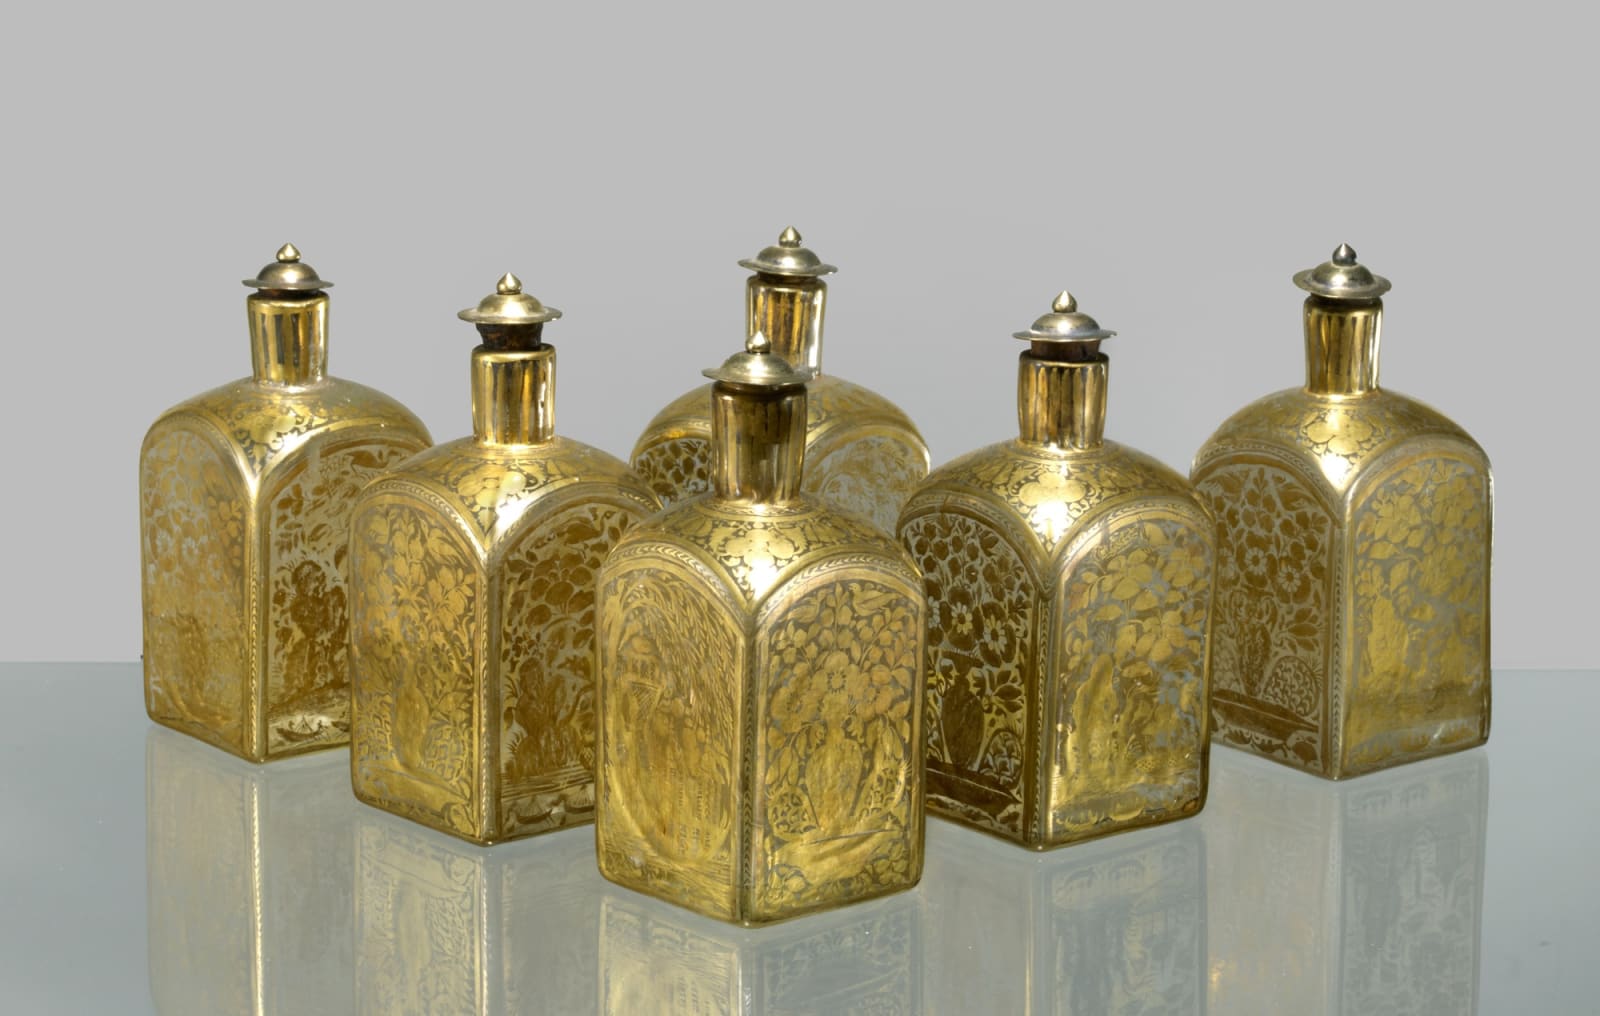 Rare Group of Six Mould-blown and Gold Painted Square Glass Bottles, Probably Gujarat, West India, or Deccan, for the European market, 18th century